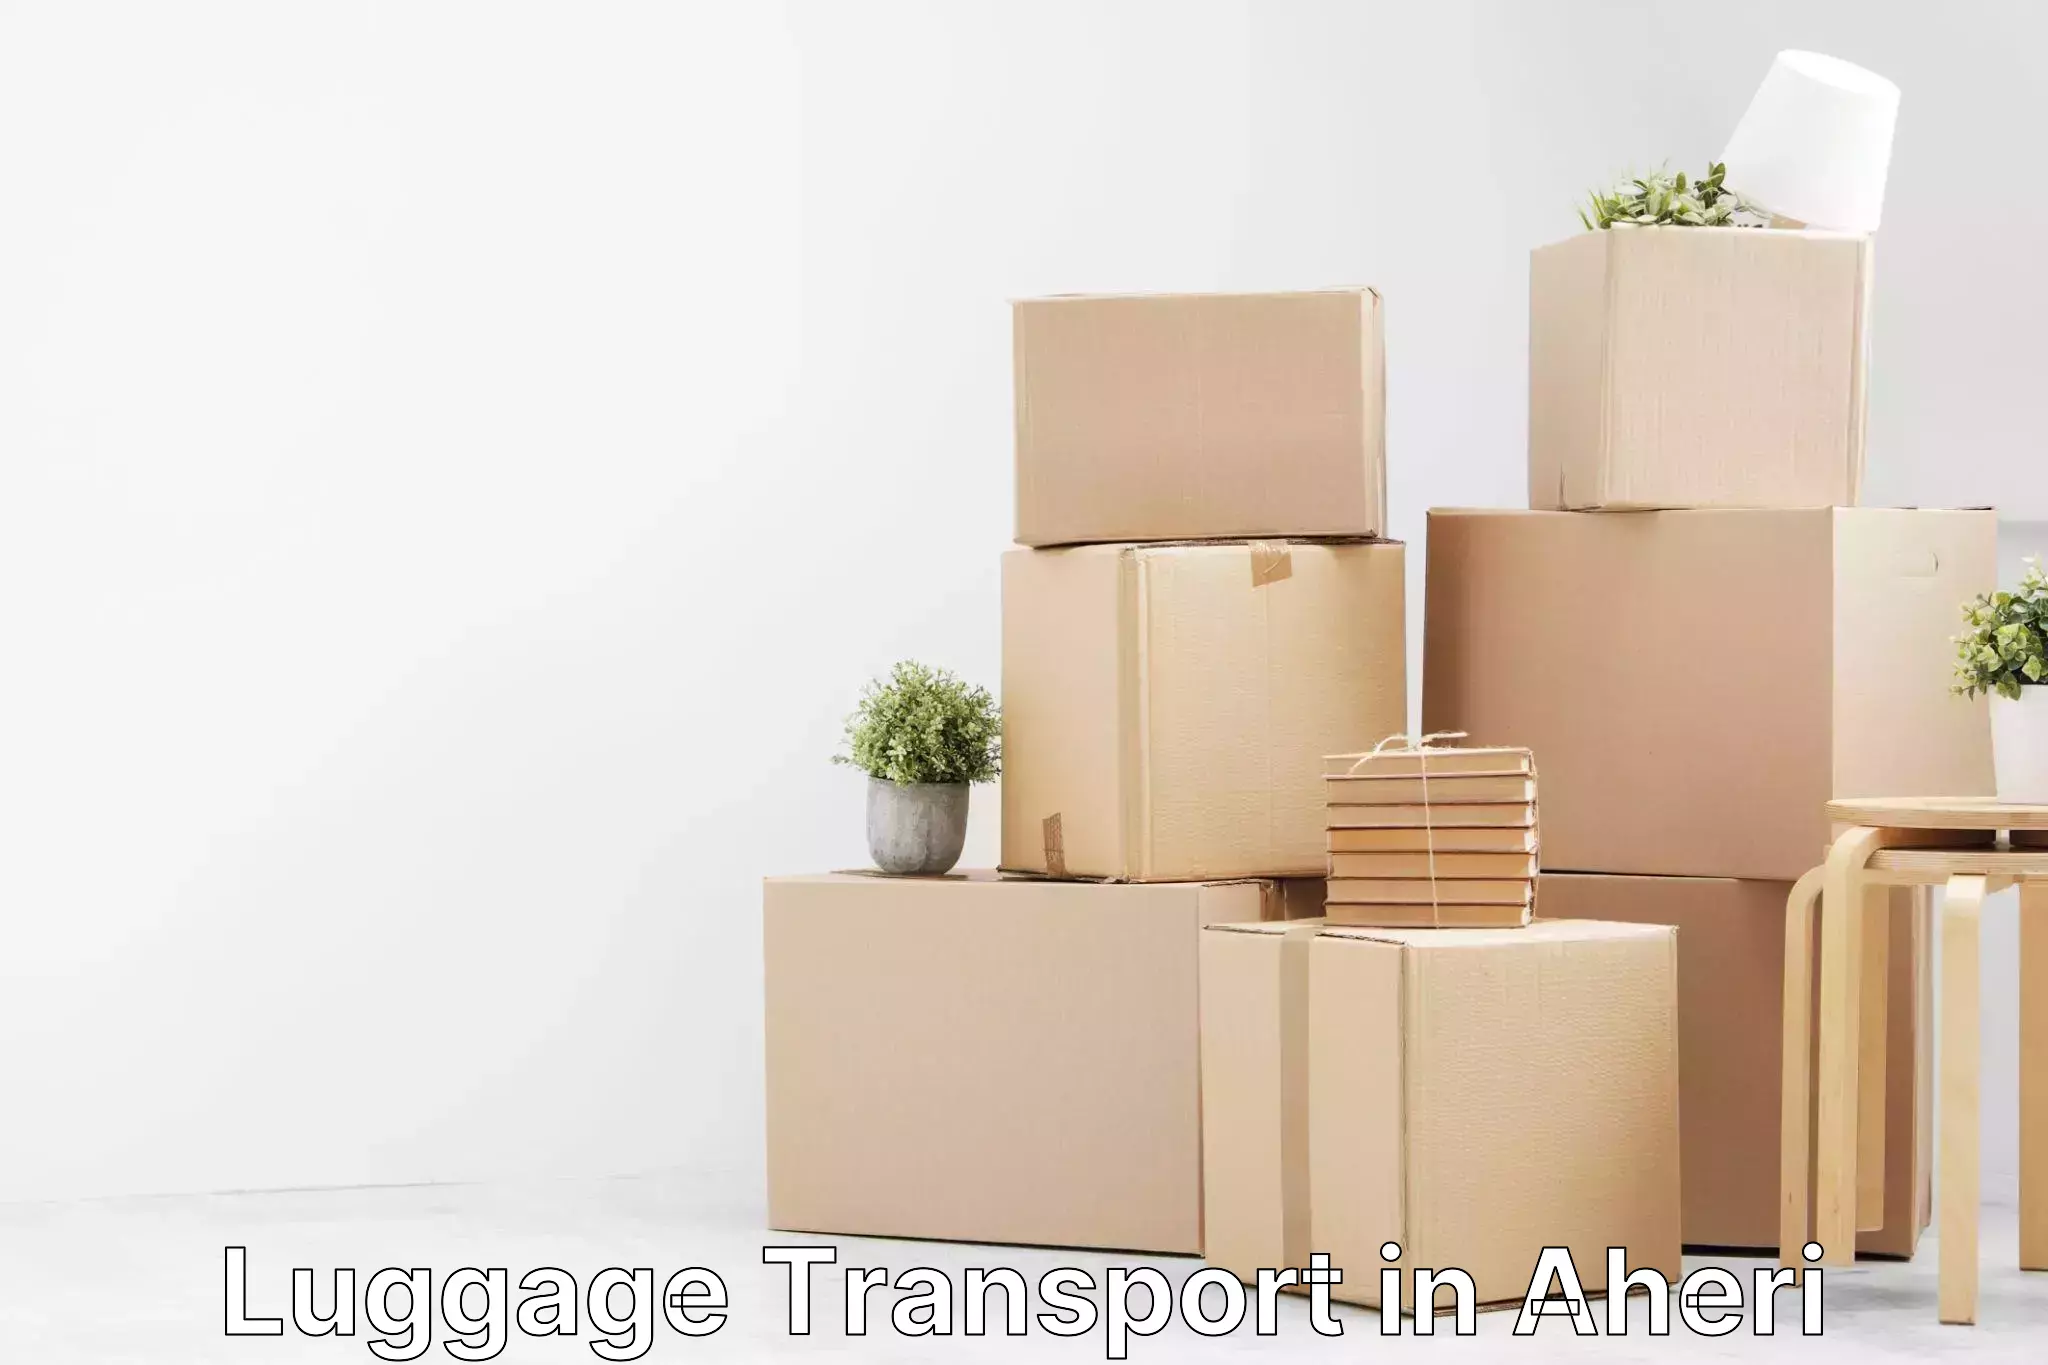 Luggage transport deals in Aheri